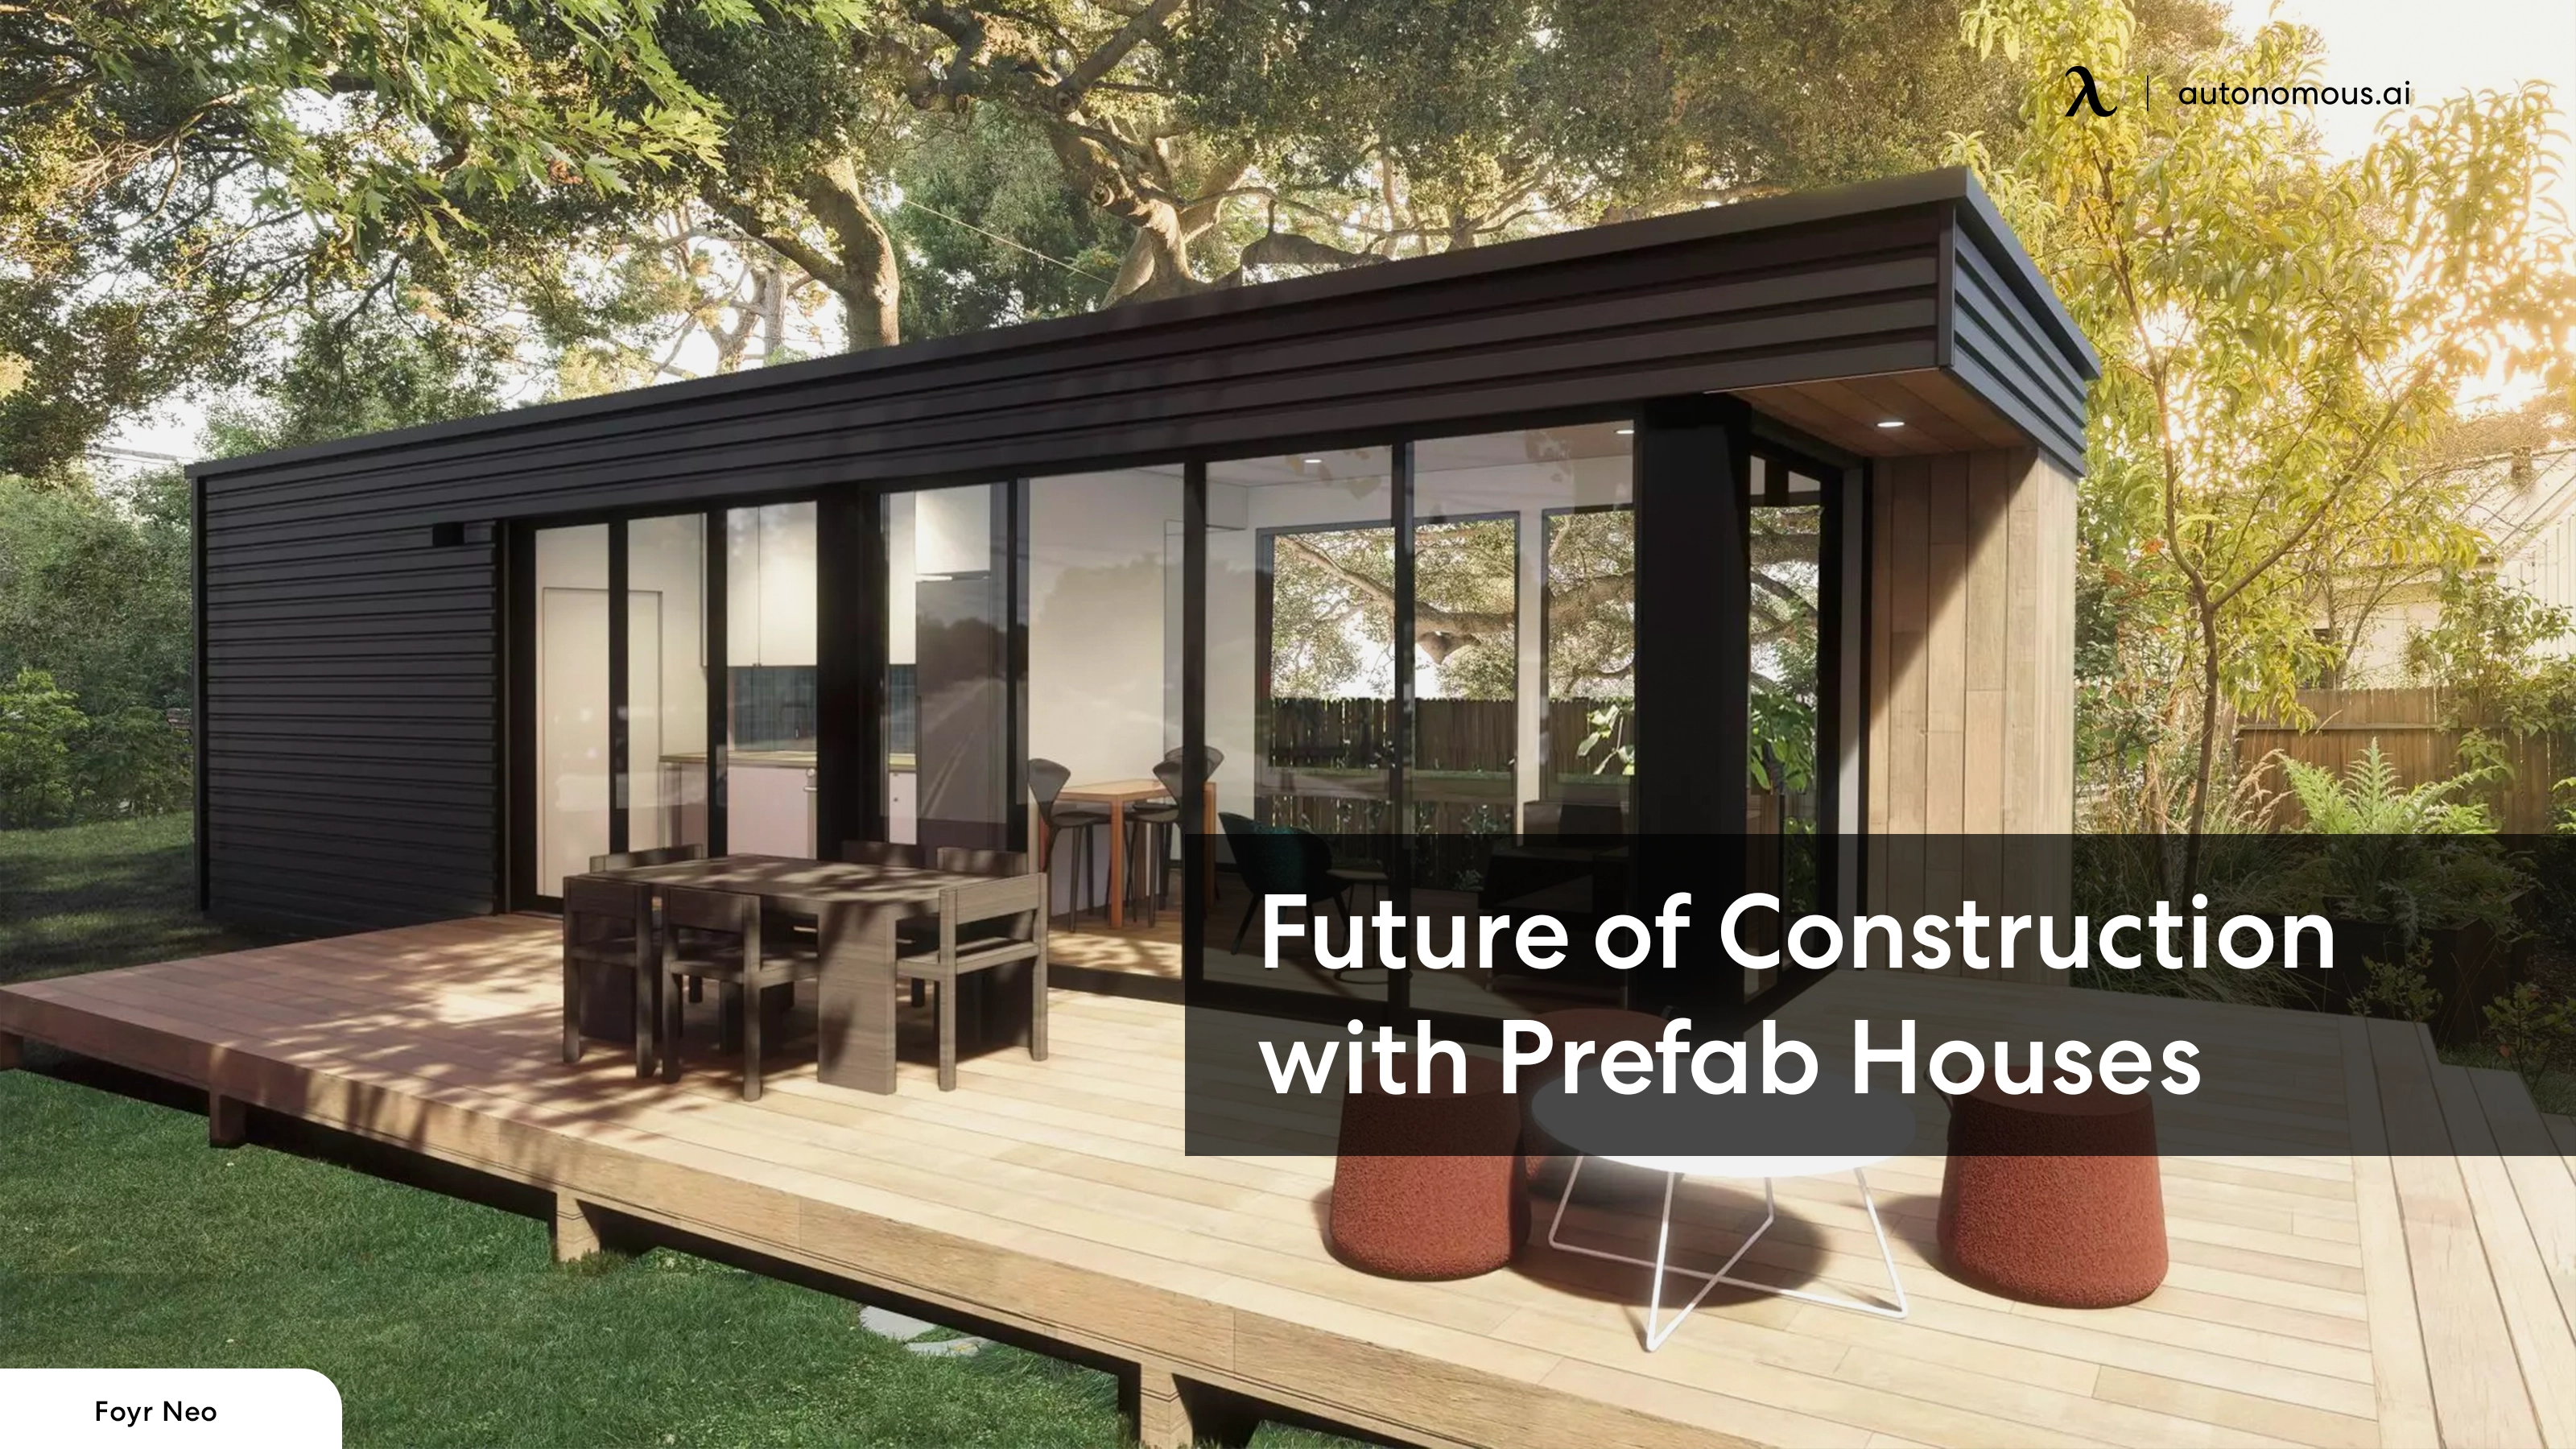 Prefab Home: How an Ingenious Idea Transformed the Way We Build